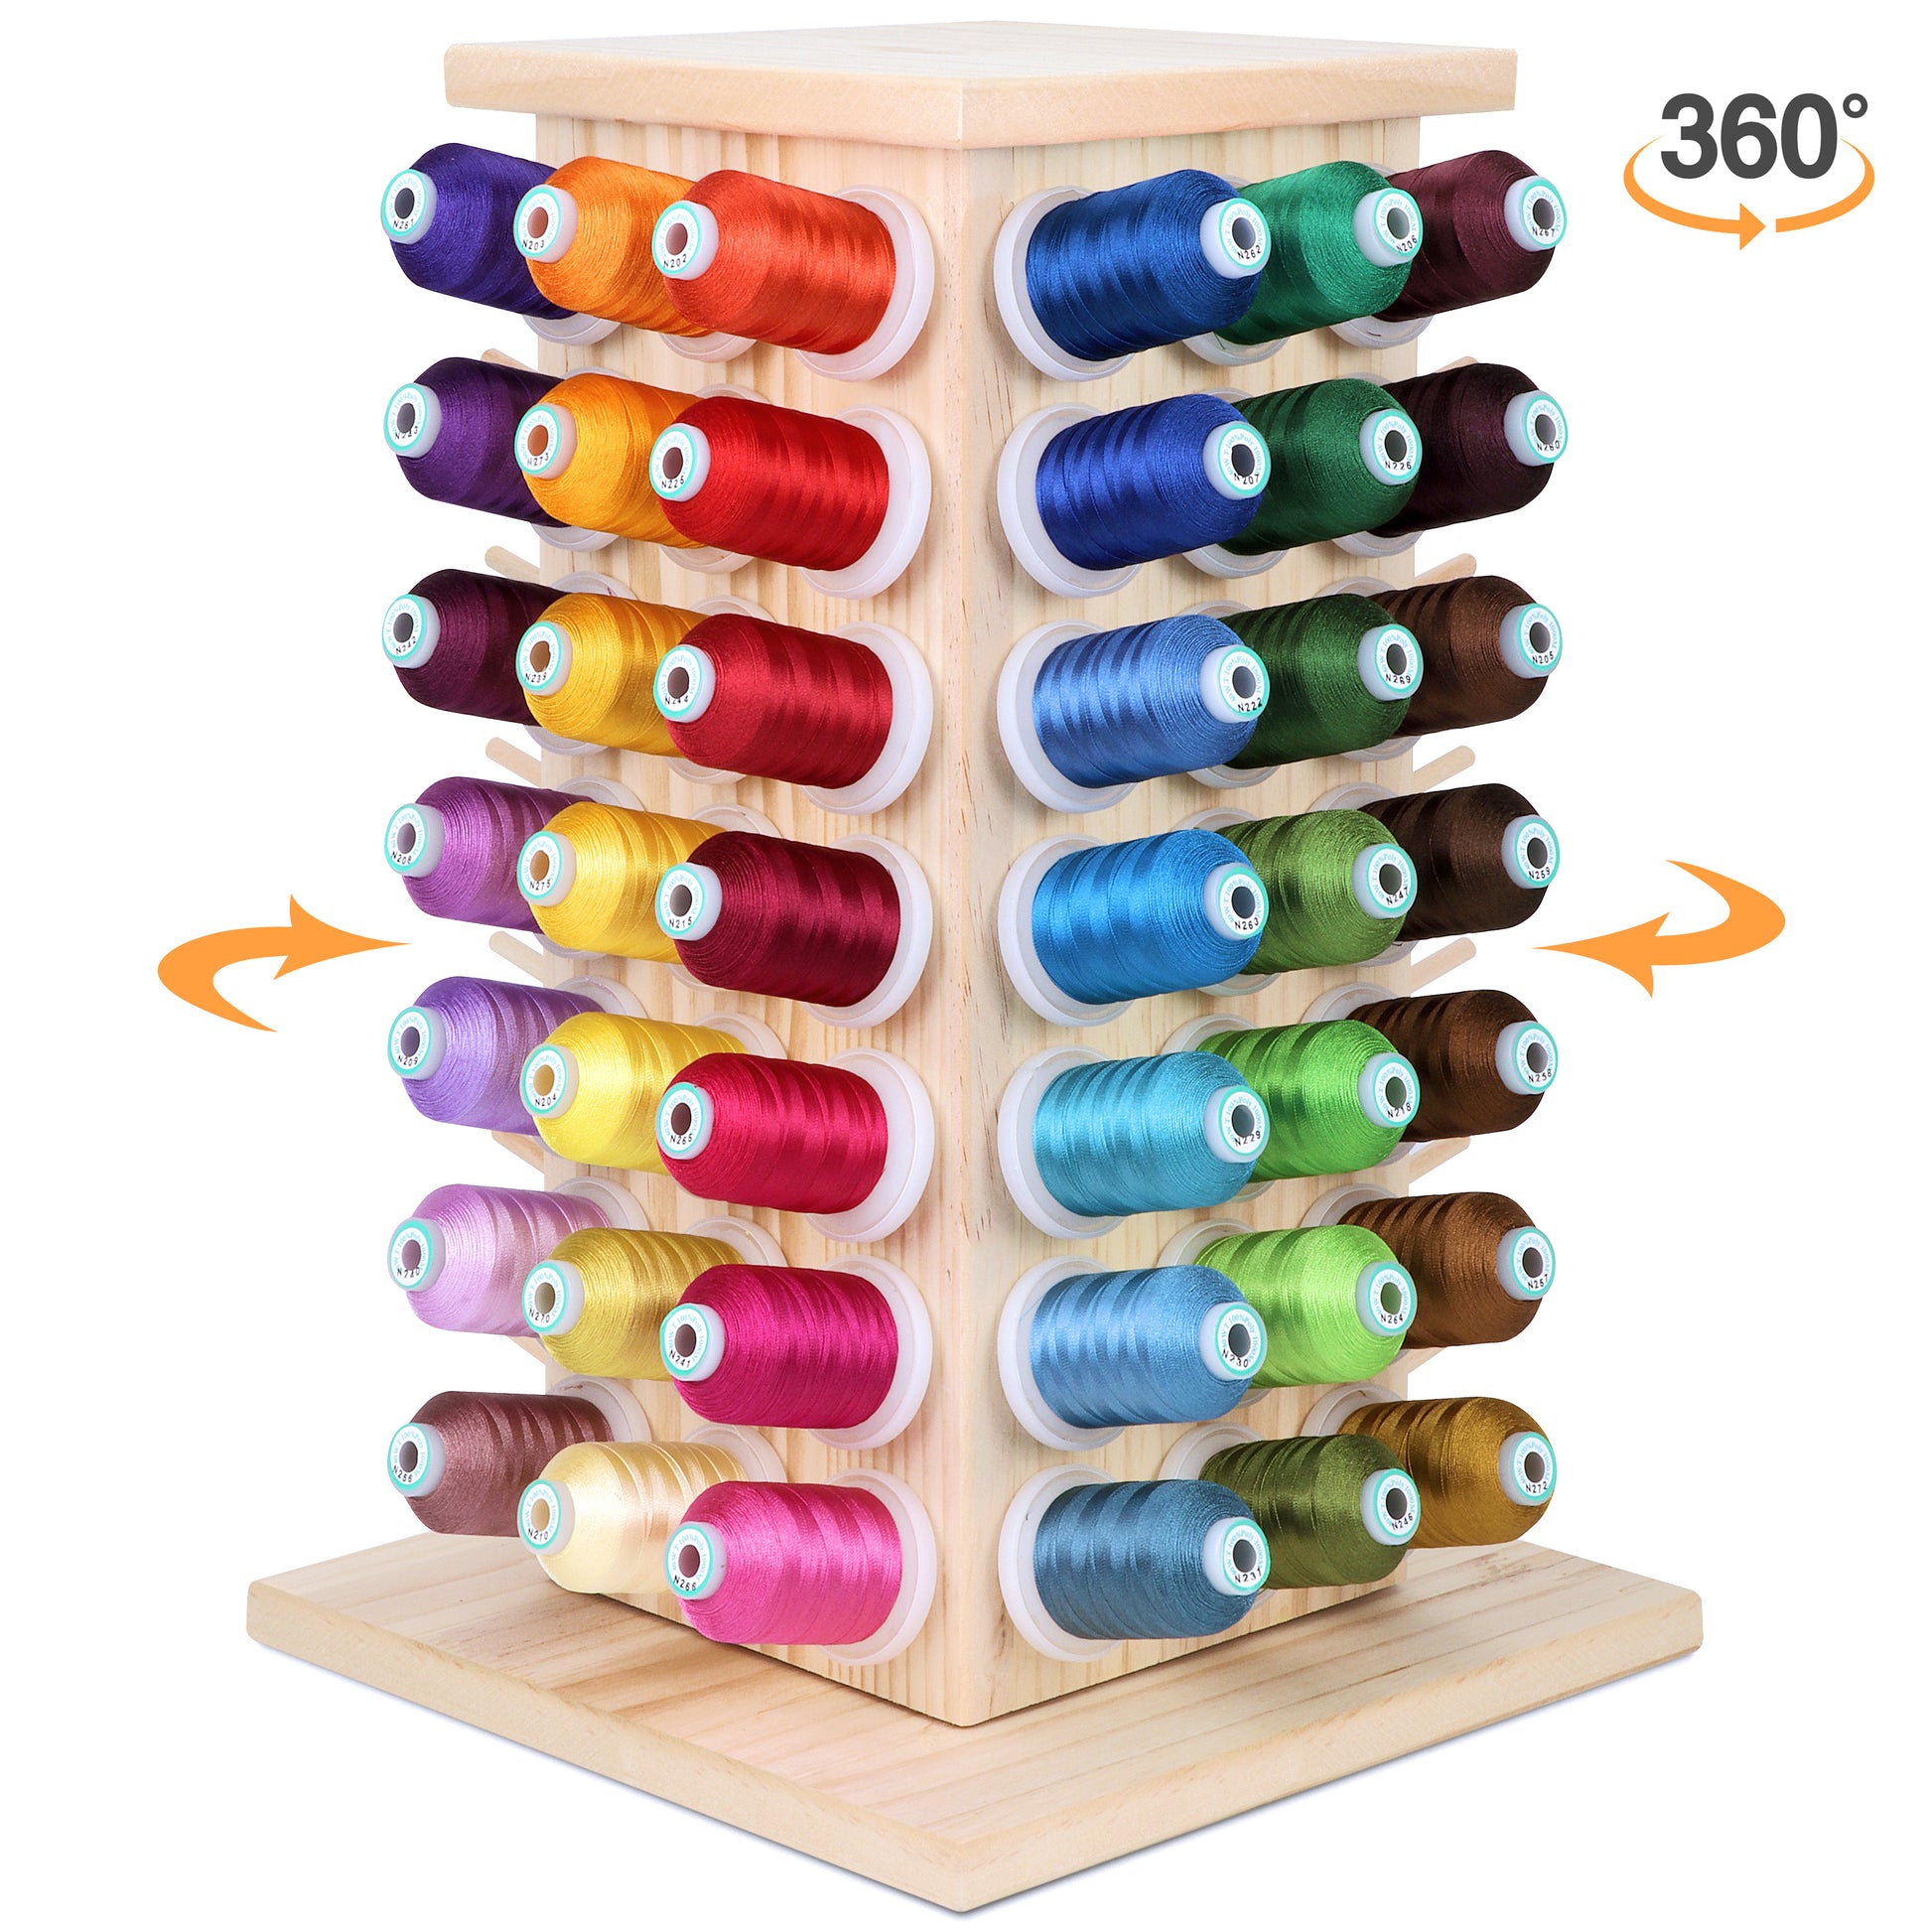 60-Spool Thread Rack, Wooden Thread Holder Sewing Organizer for Sewing, Quilting, Embroidery, Hair-braiding, Hanging Jewelry, Size: 40x30cm-, Brown